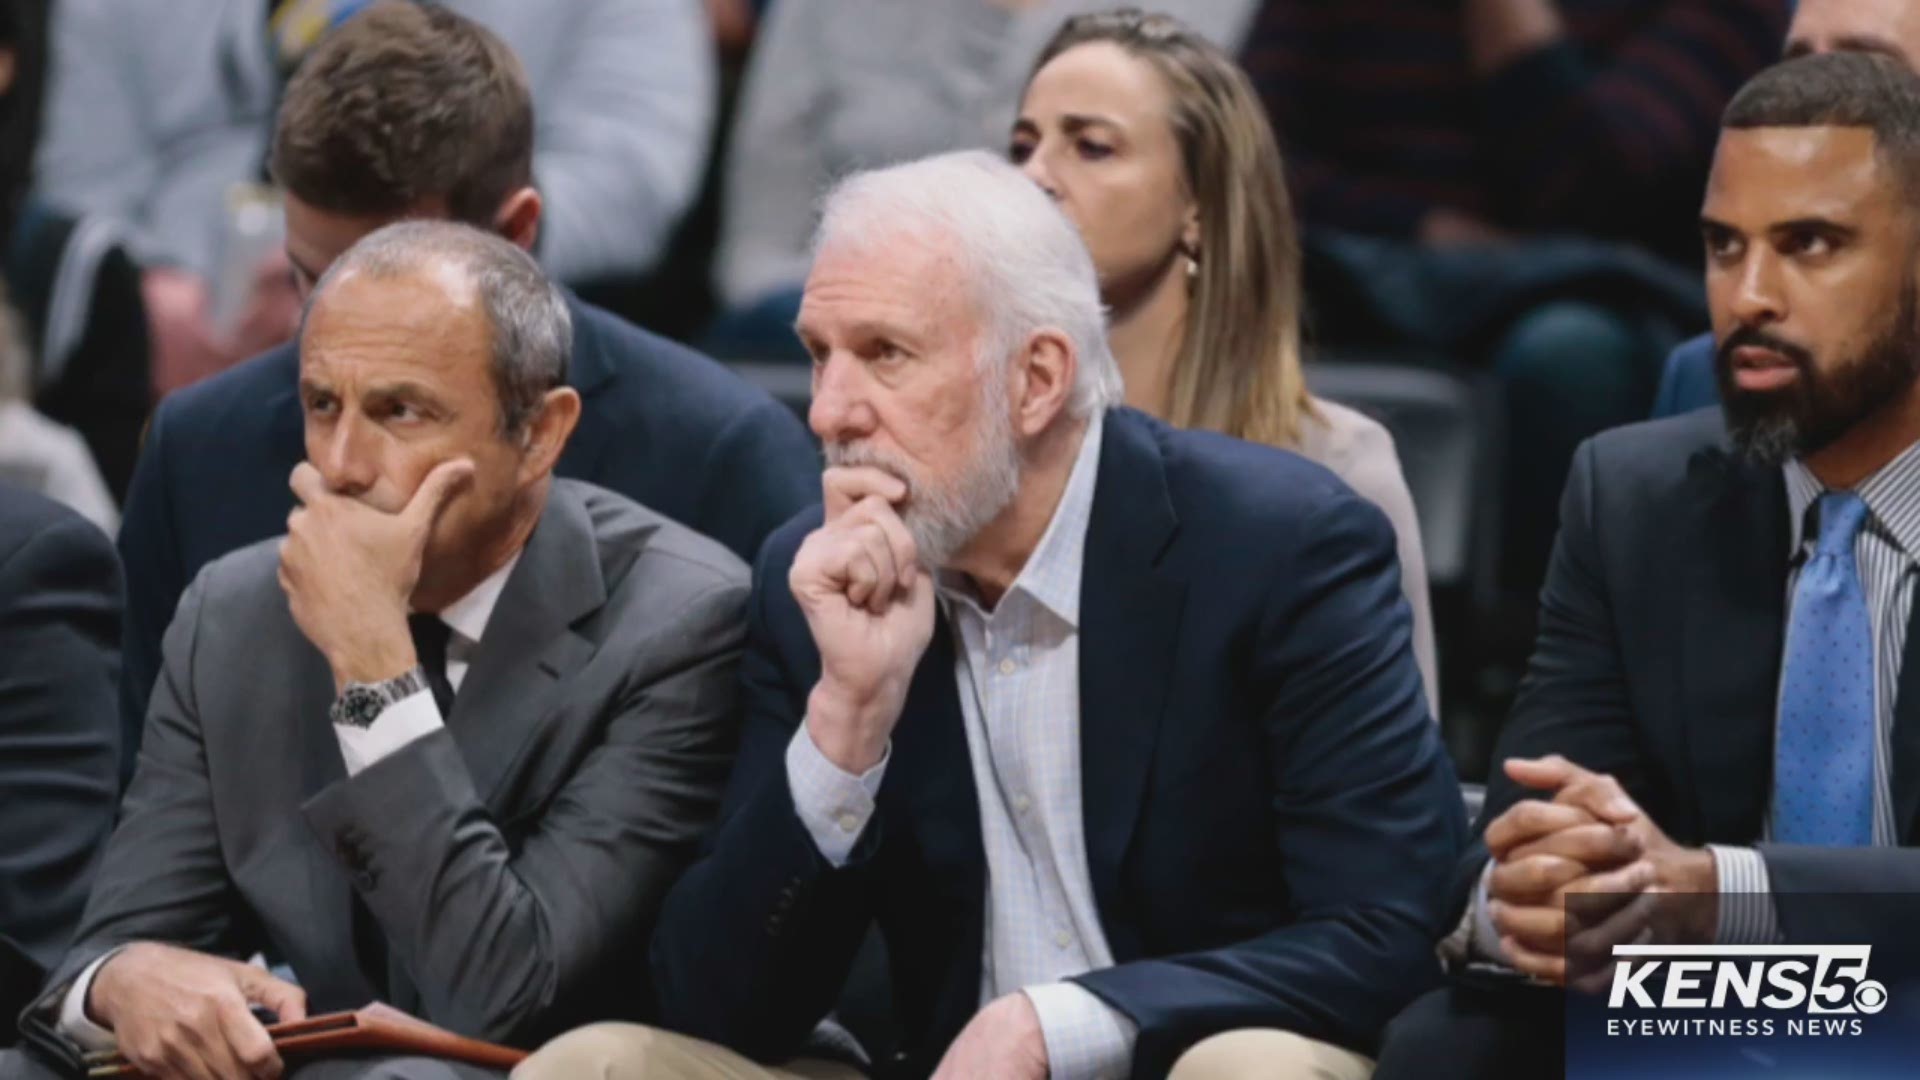 According to a report from ESPN, San Antonio Spurs assistants Ettore Messina and Ime Udoka have interviewed for the Toronto Raptors head coaching job.